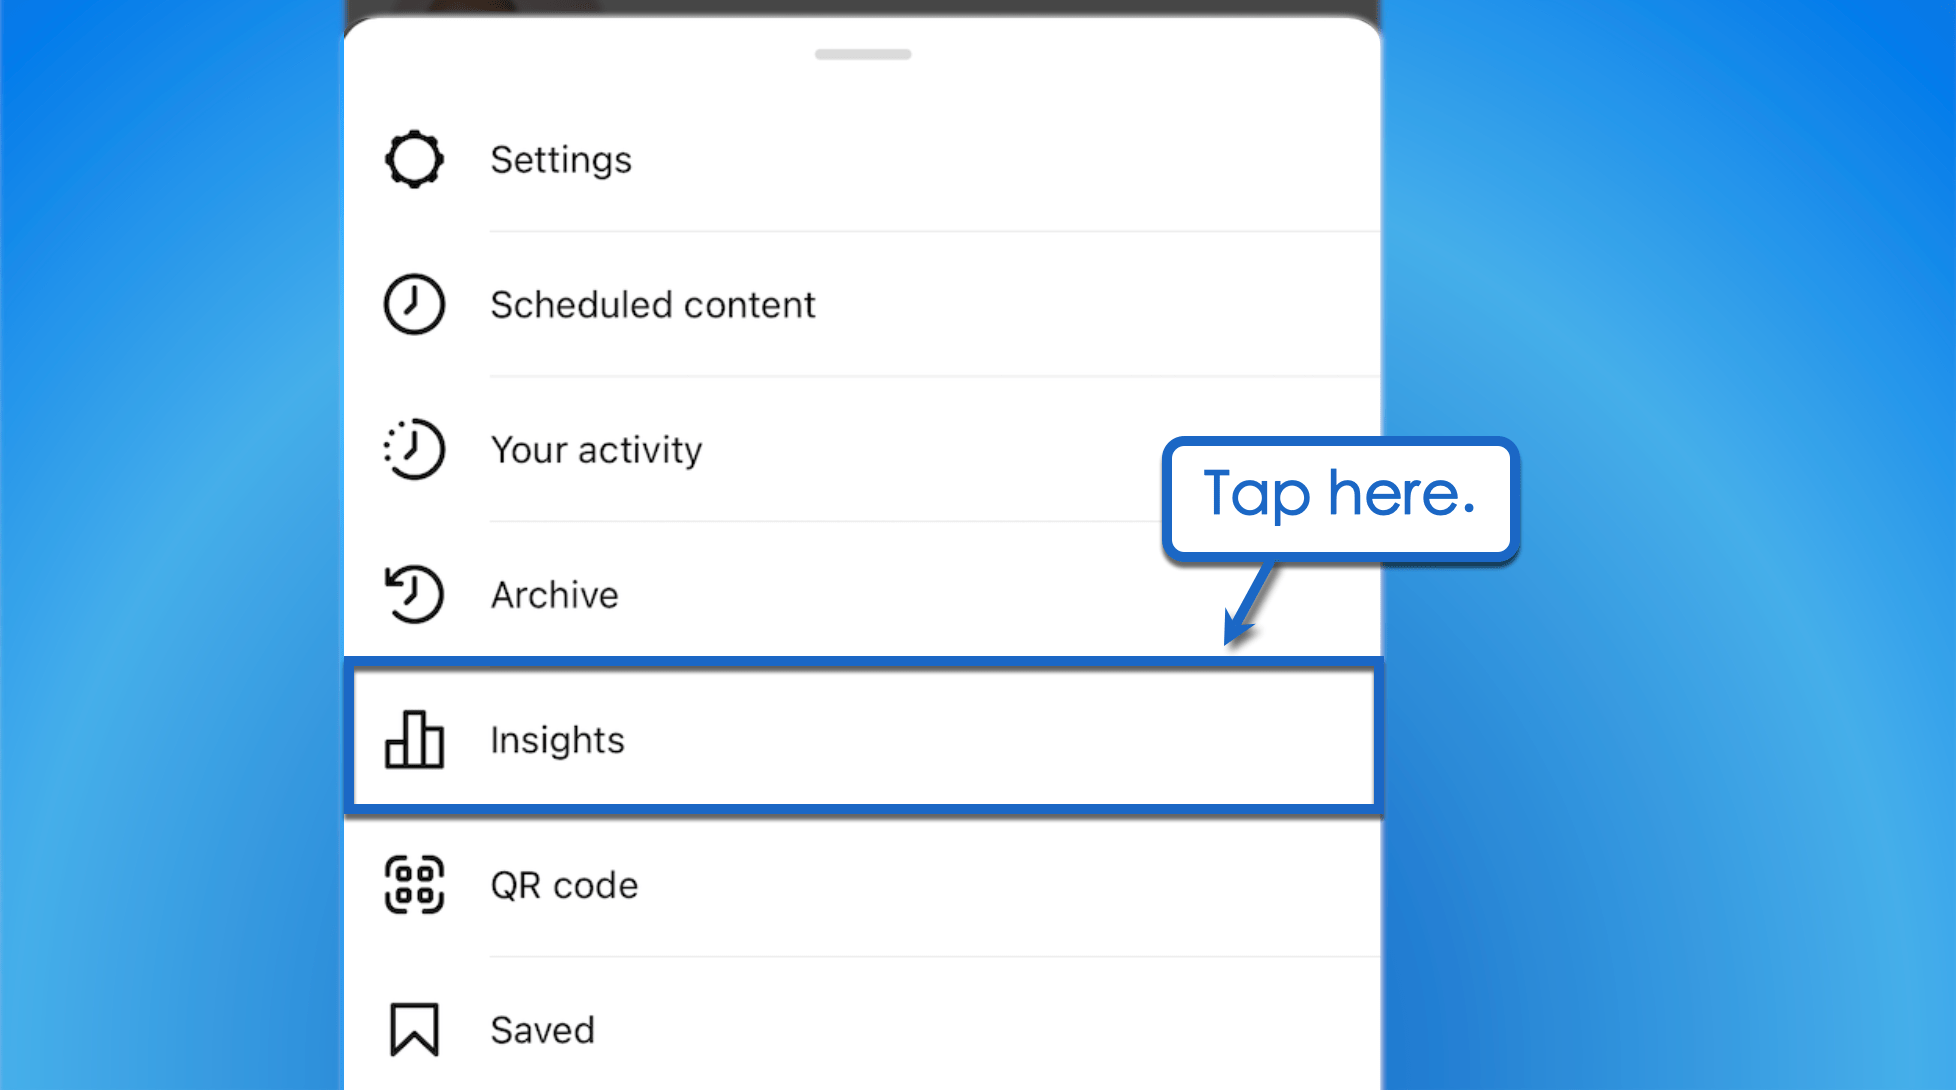 Tap 'Insights' to generate report.